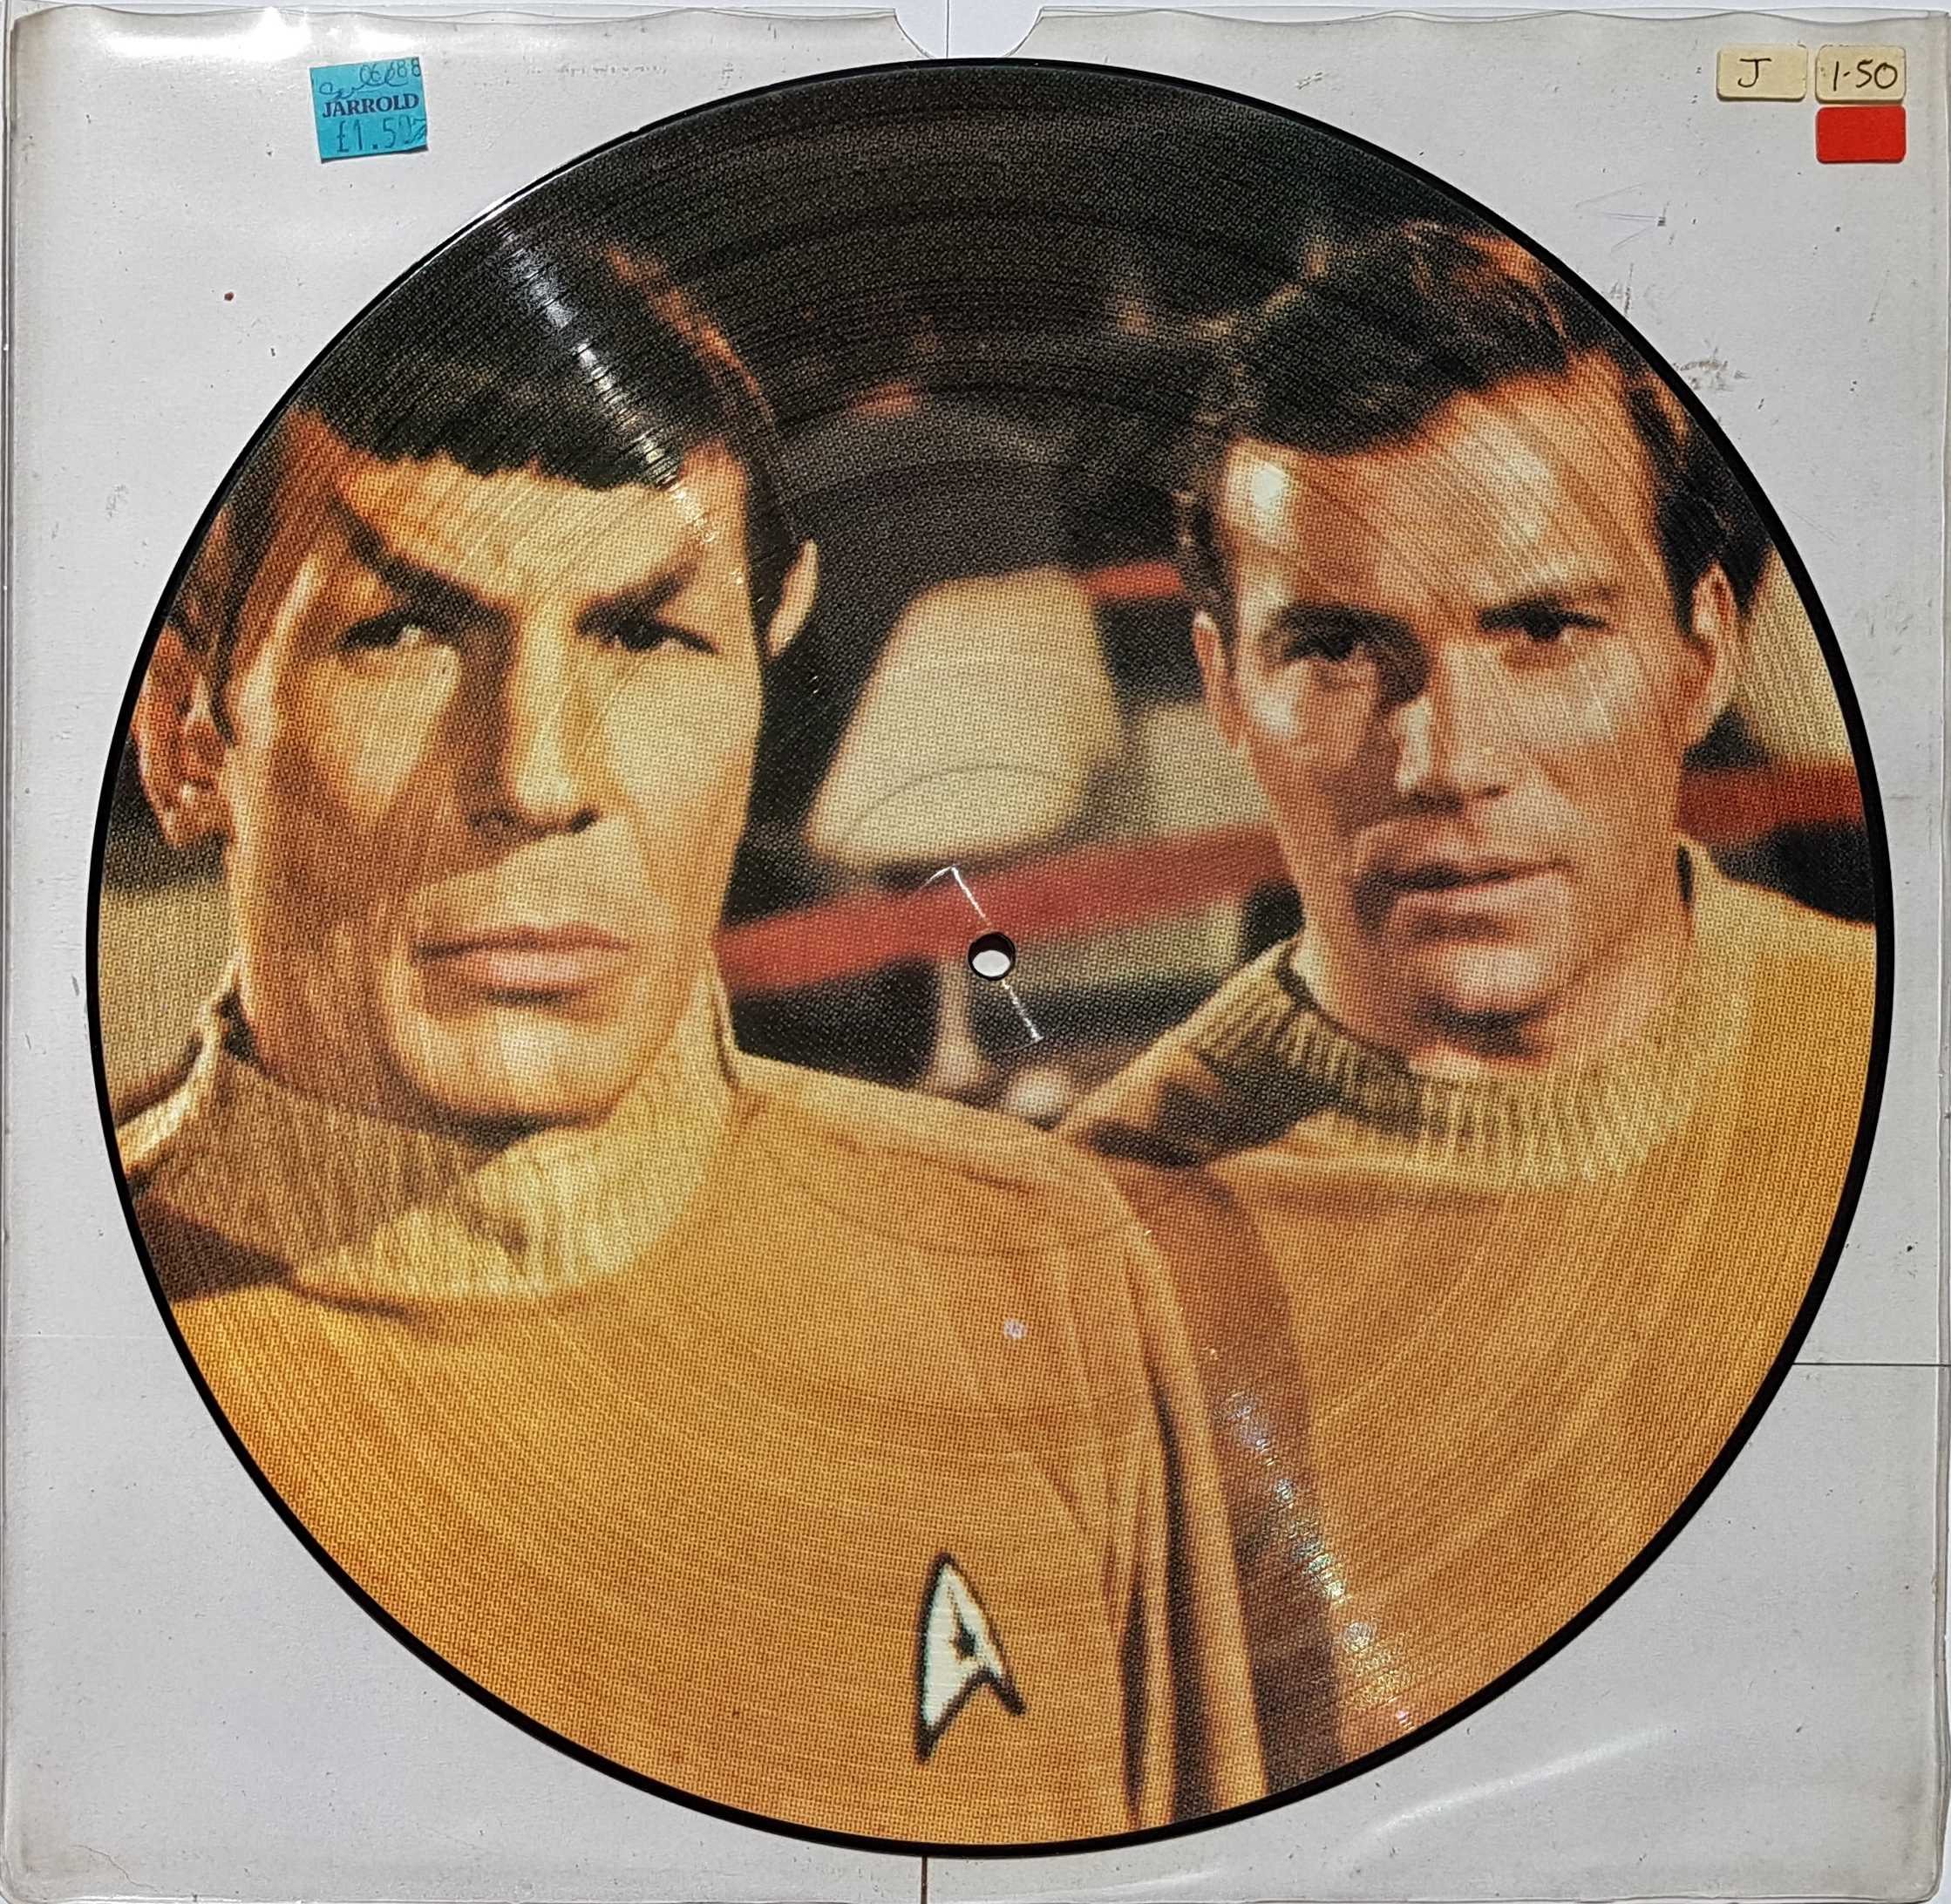 Picture of NCPX 706 Star trek by artist Alexander Courrage from the BBC records and Tapes library